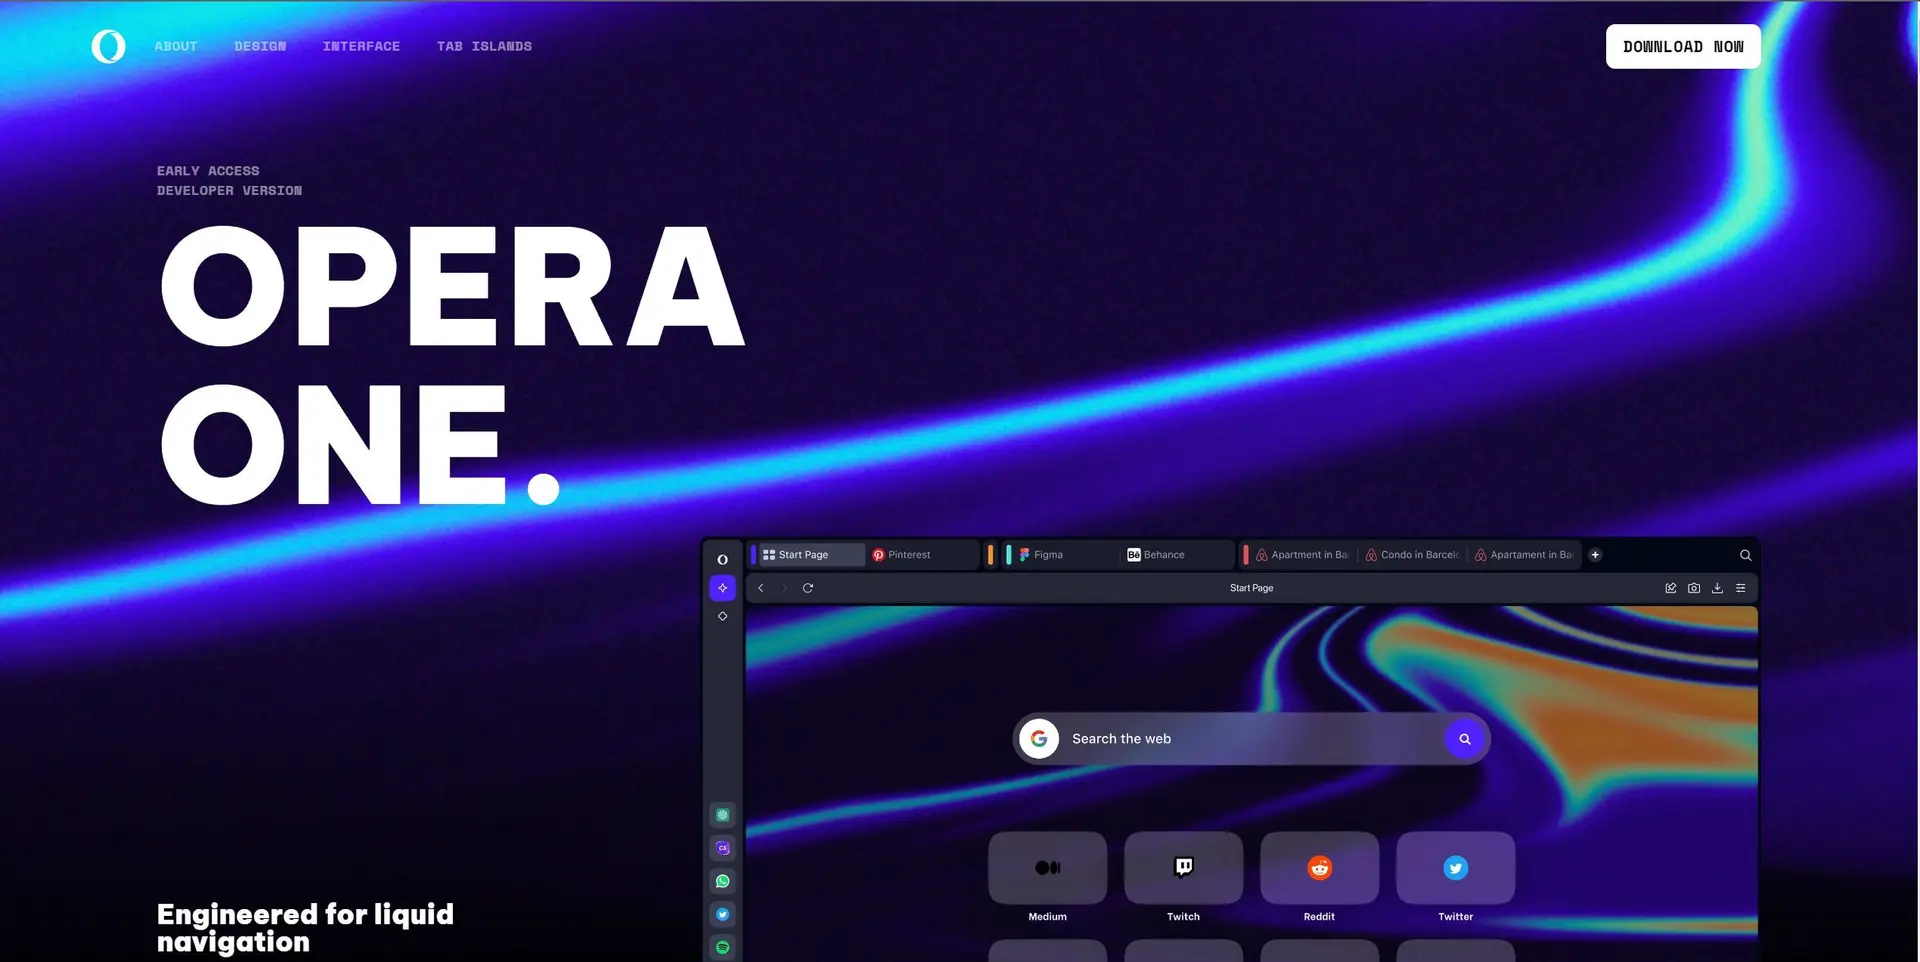 Opera One Browserwebsite picture